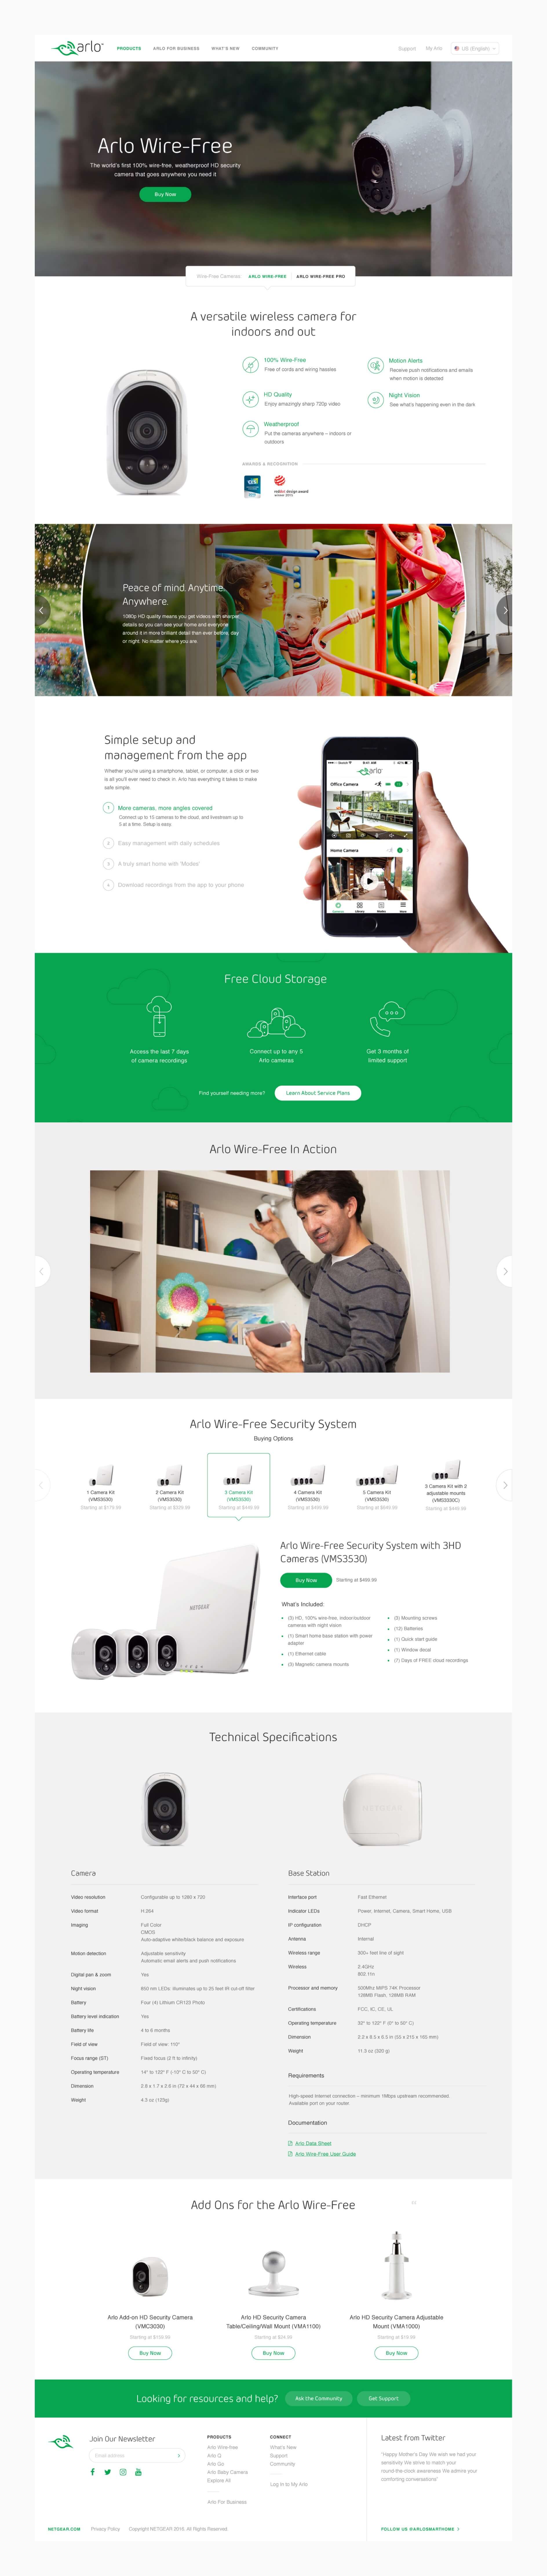 Product Landing Page Design for Arlo